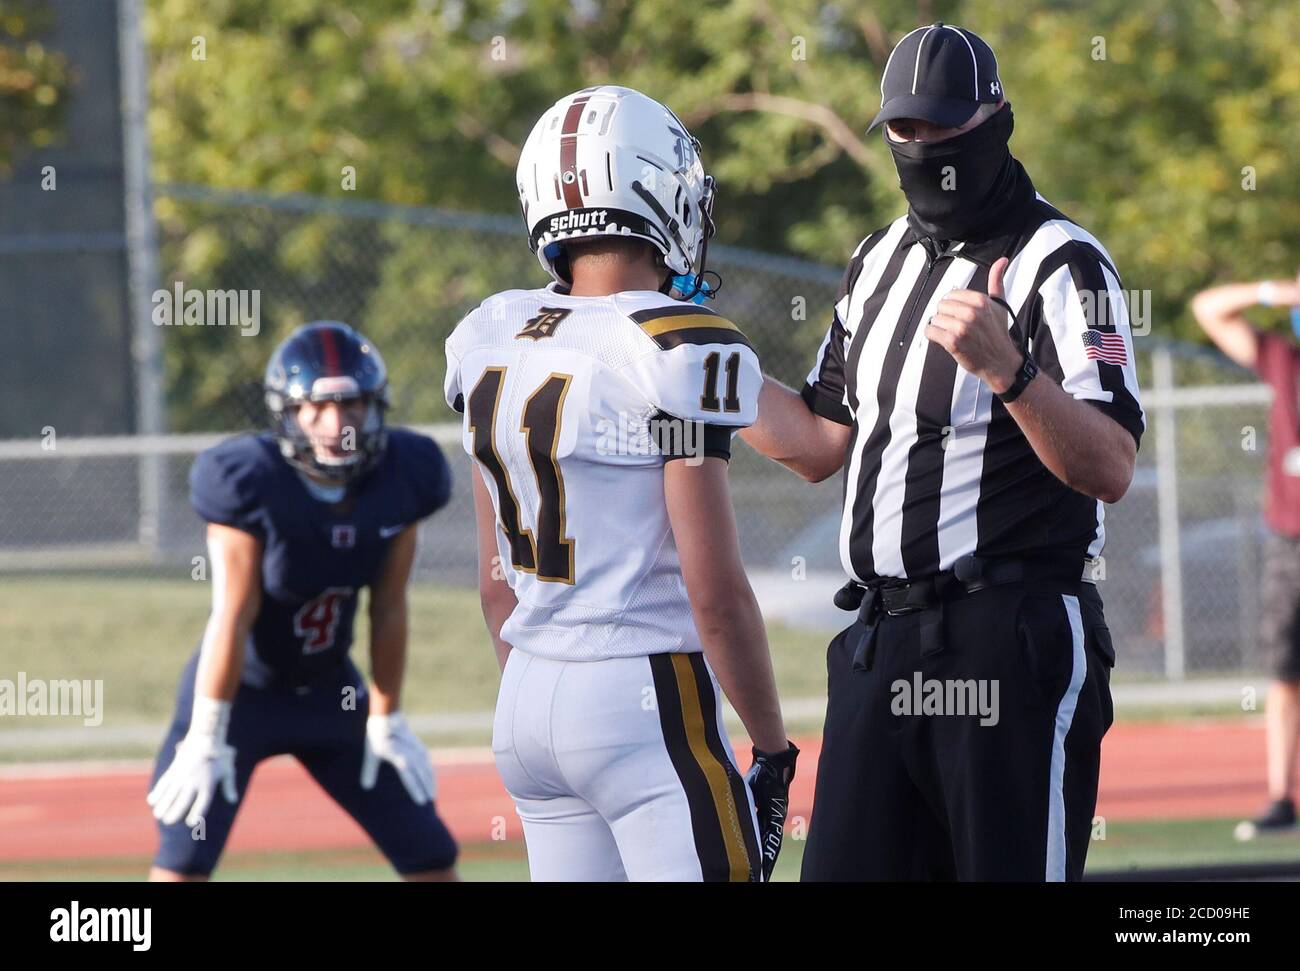 A masked official talks to a Davis Darts Jackson Leaver (11) before a kick off between two high school teams the Herriman Mustangs and Davis Darts, the first regular season football game in the United States since the coronavirus disease (COVID-19) pandemic began, at Herriman High School in Herriman, Utah, U.S. August 13, 2020.  REUTERS/George Frey Stock Photo